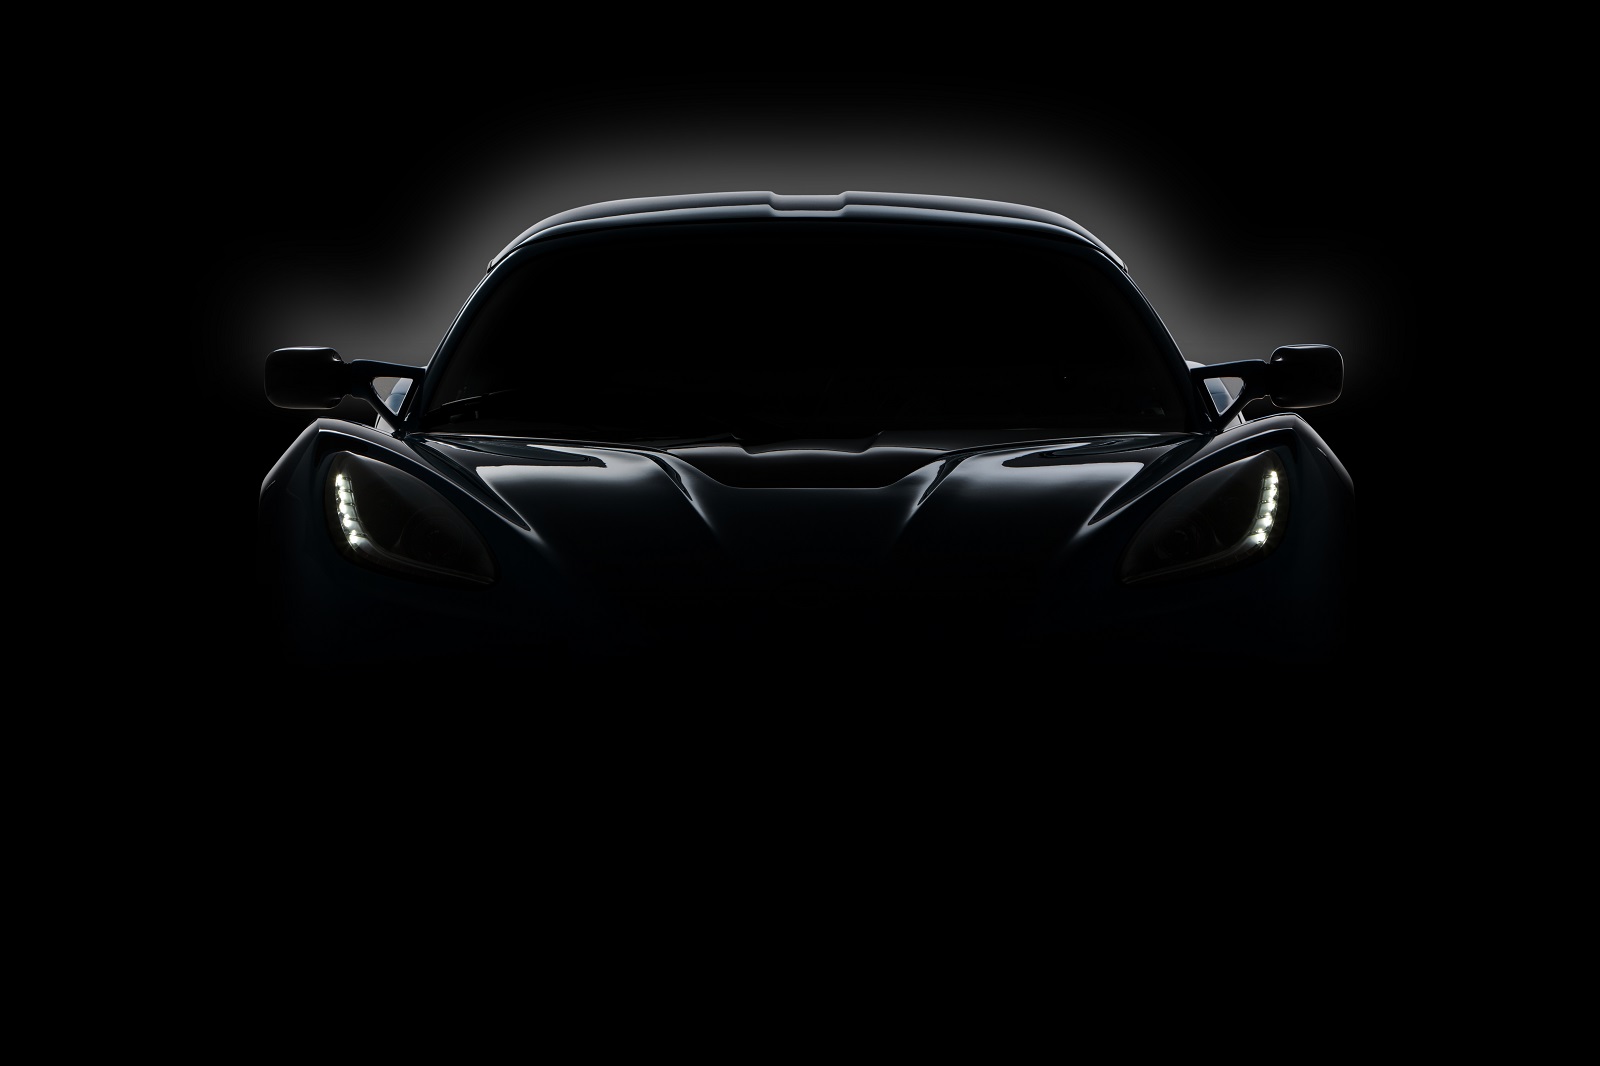 detroit electric all electric two seat sports car teaser photo march 2013_100422053_h